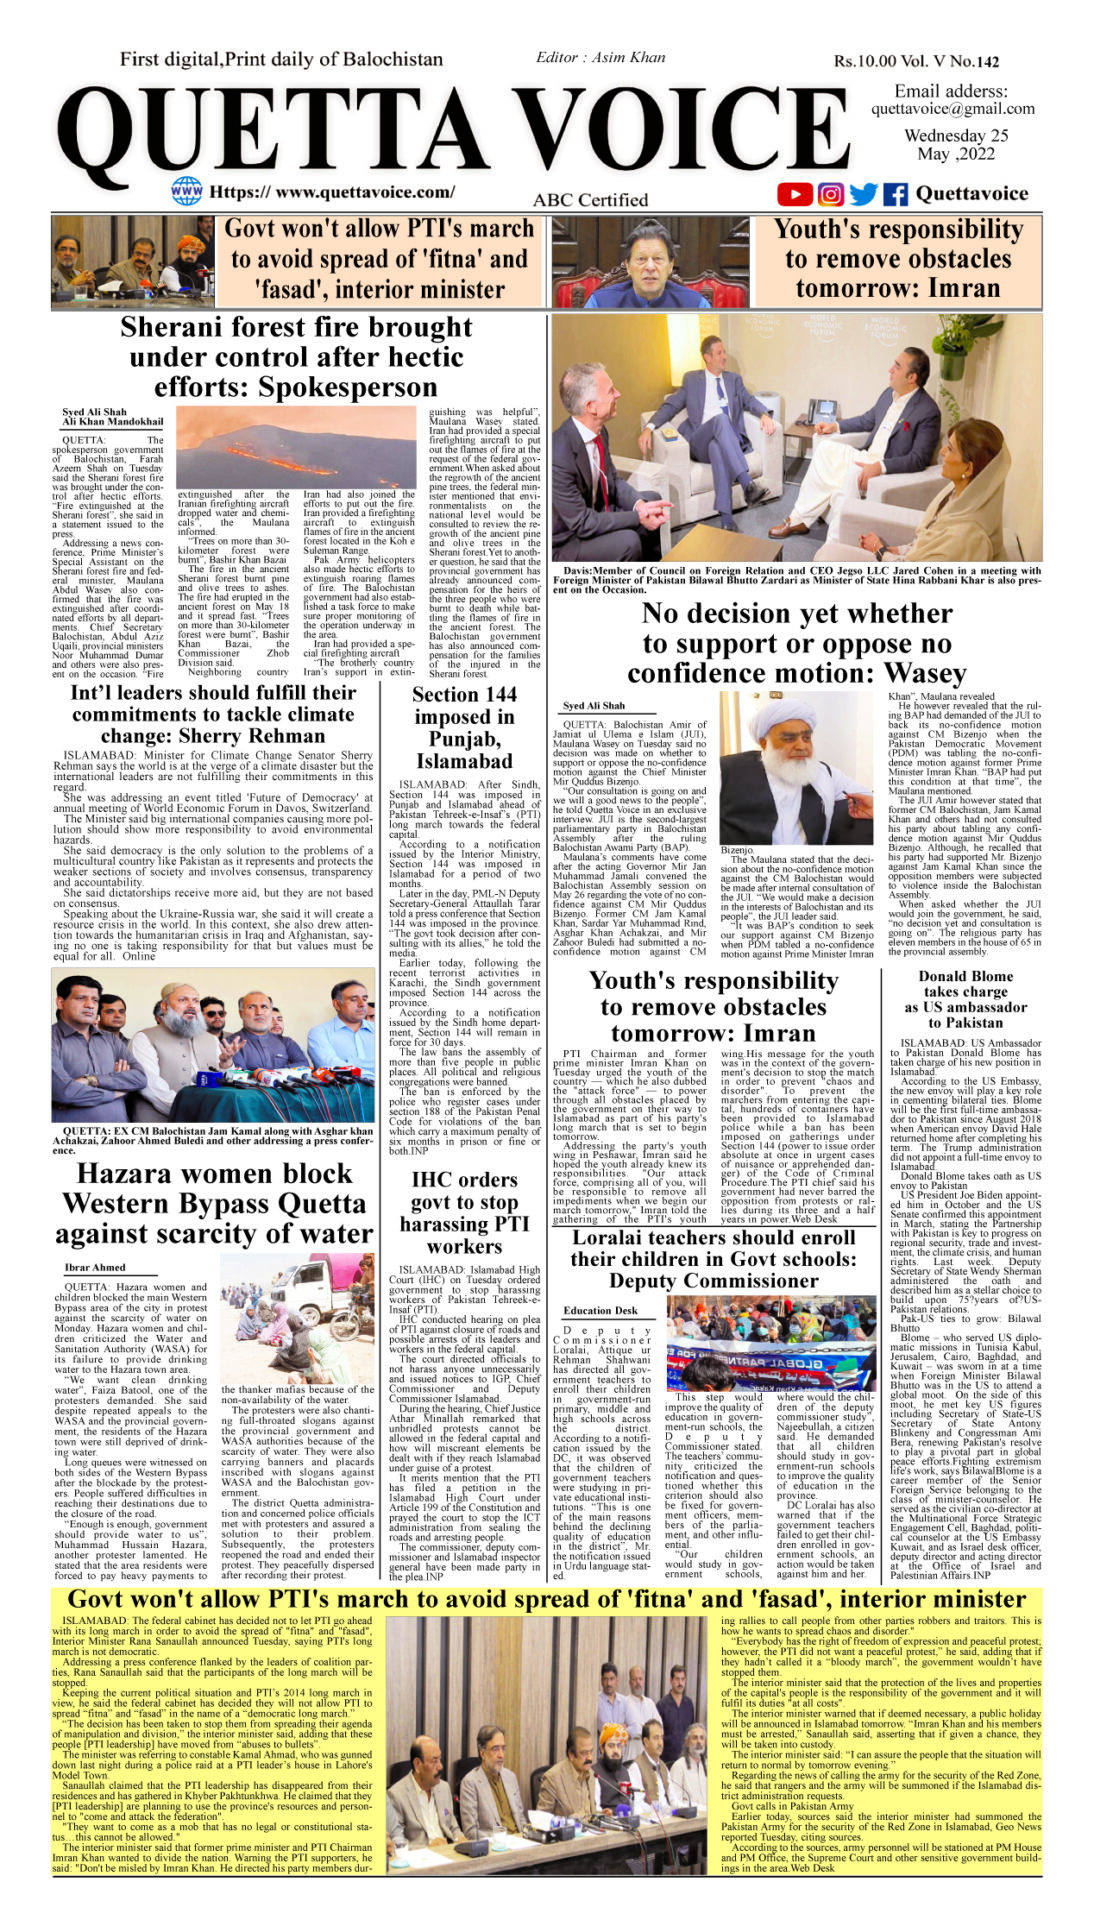 Today's Quetta Voice Newspaper, Wednesday, May 25, 2022